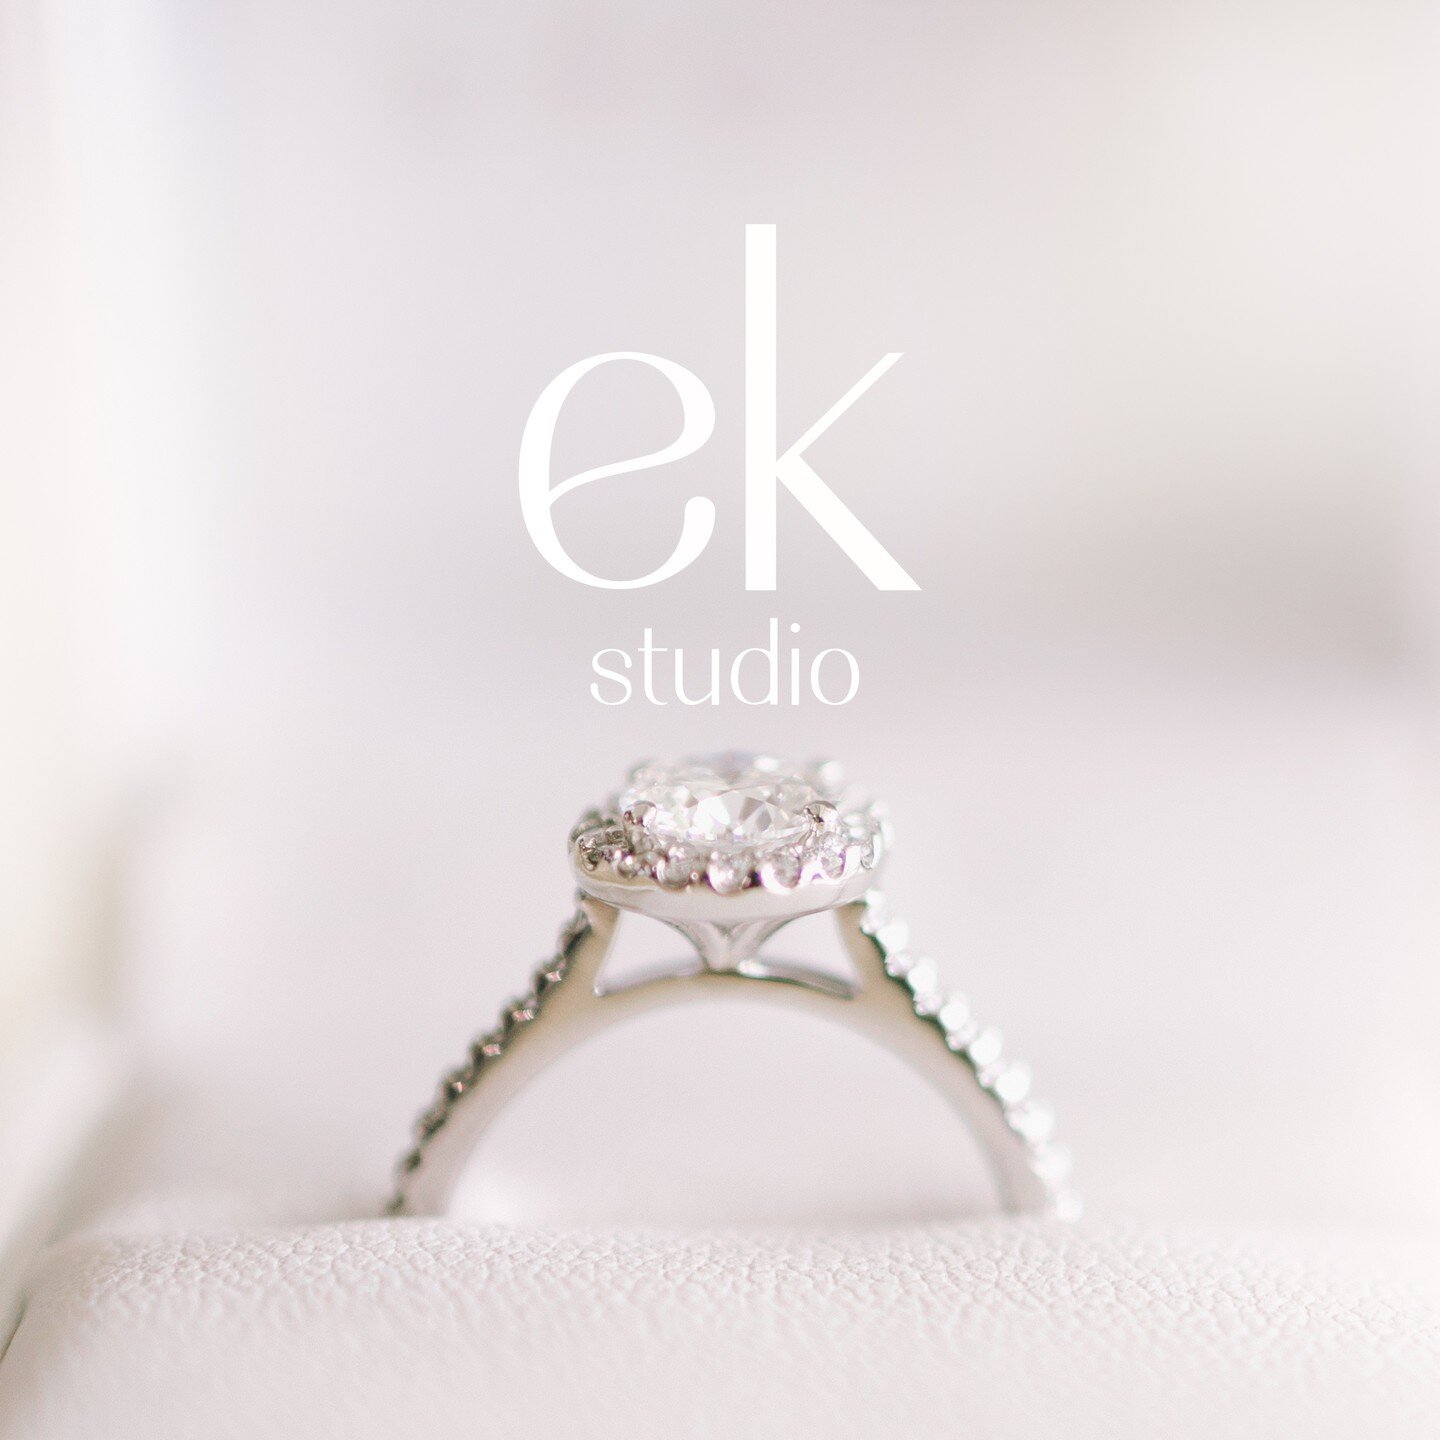 Very excited to finally have our new E.K Studio branding go live! Nice &amp; freshhh.